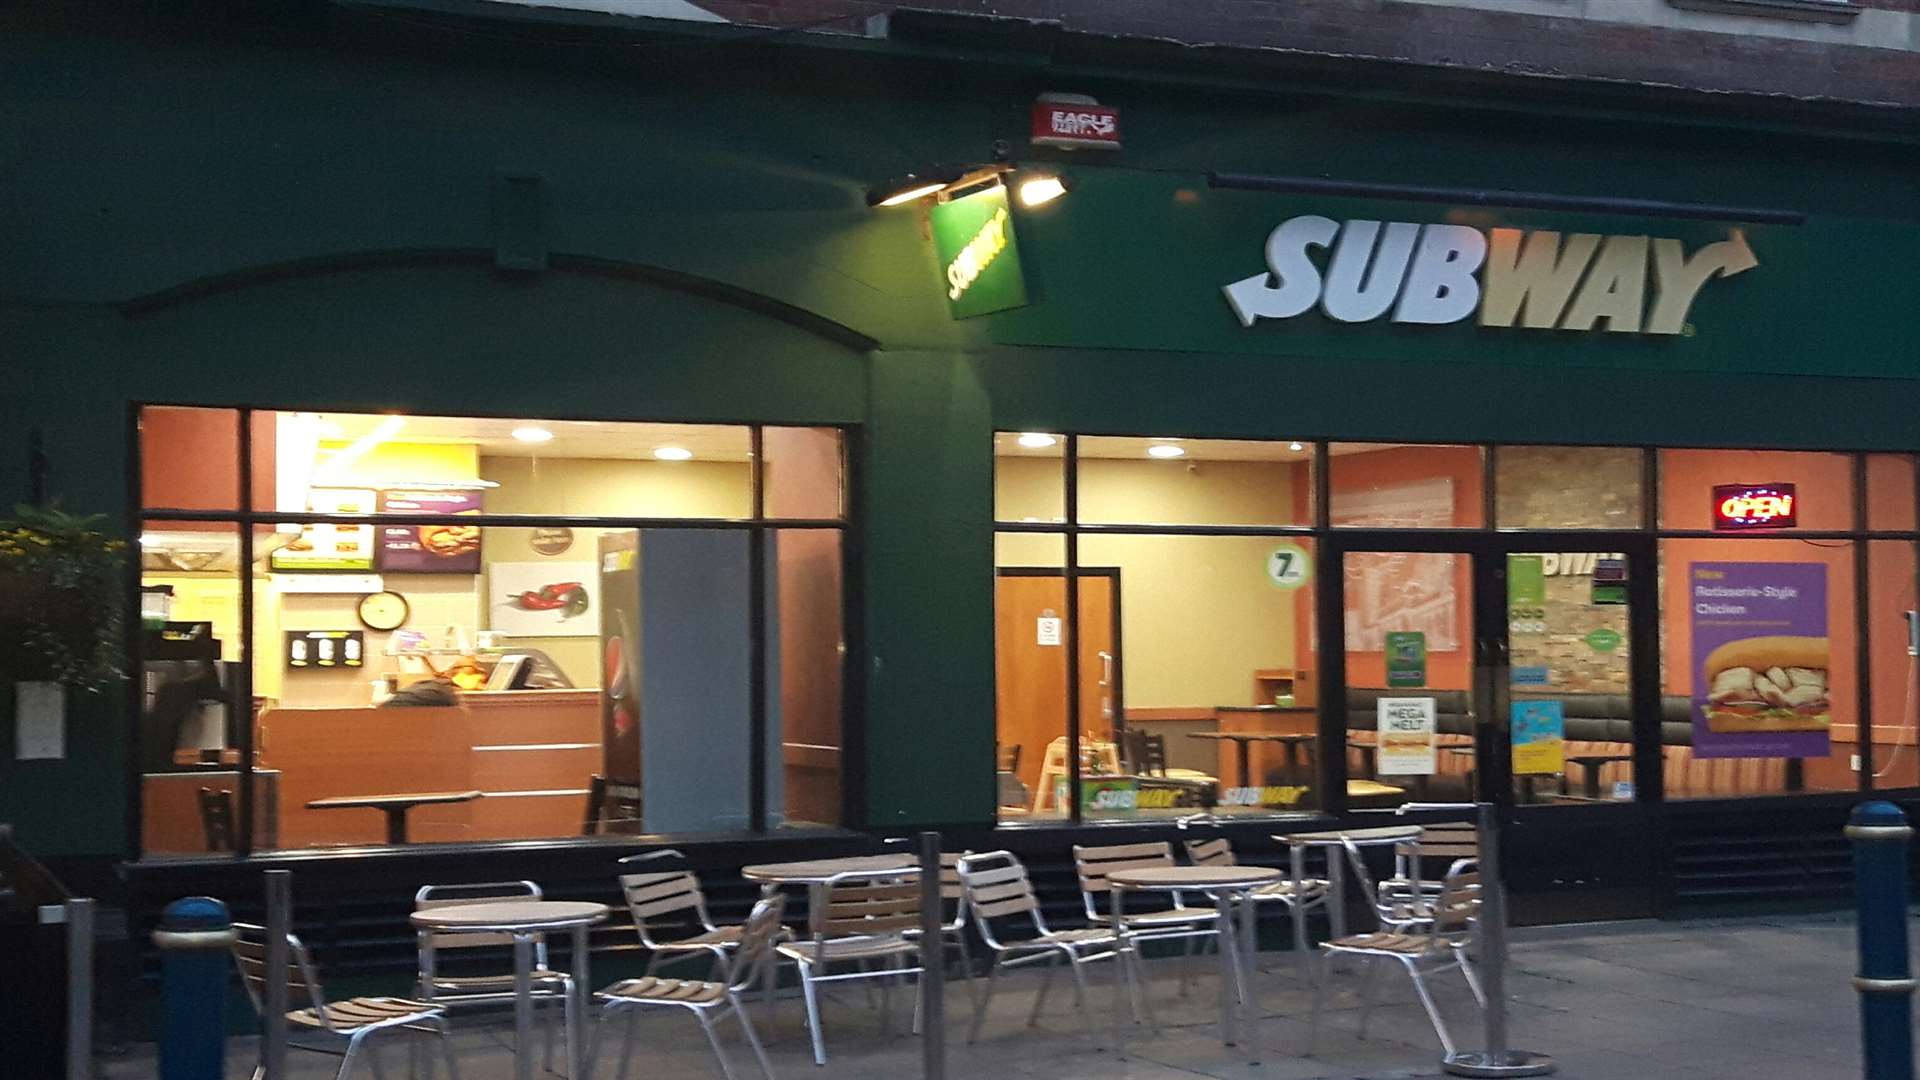 Subway in Cannon Street, Dover